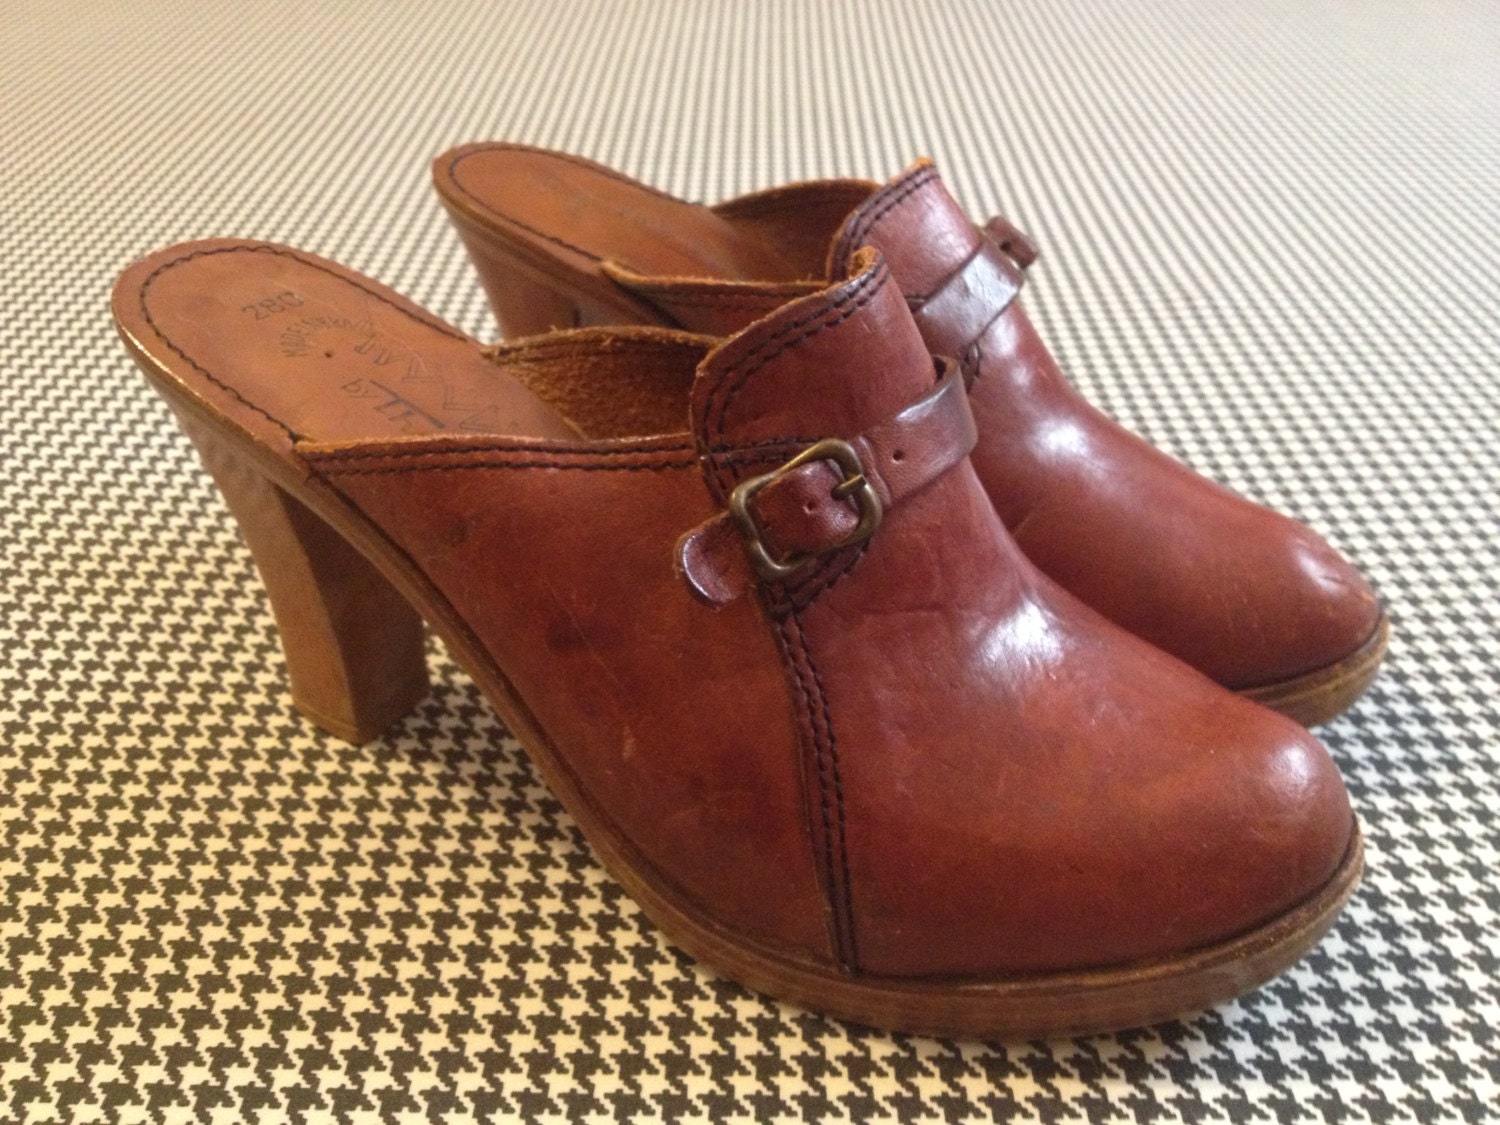 1970's leather and wood high heel clogs by Tom McAn